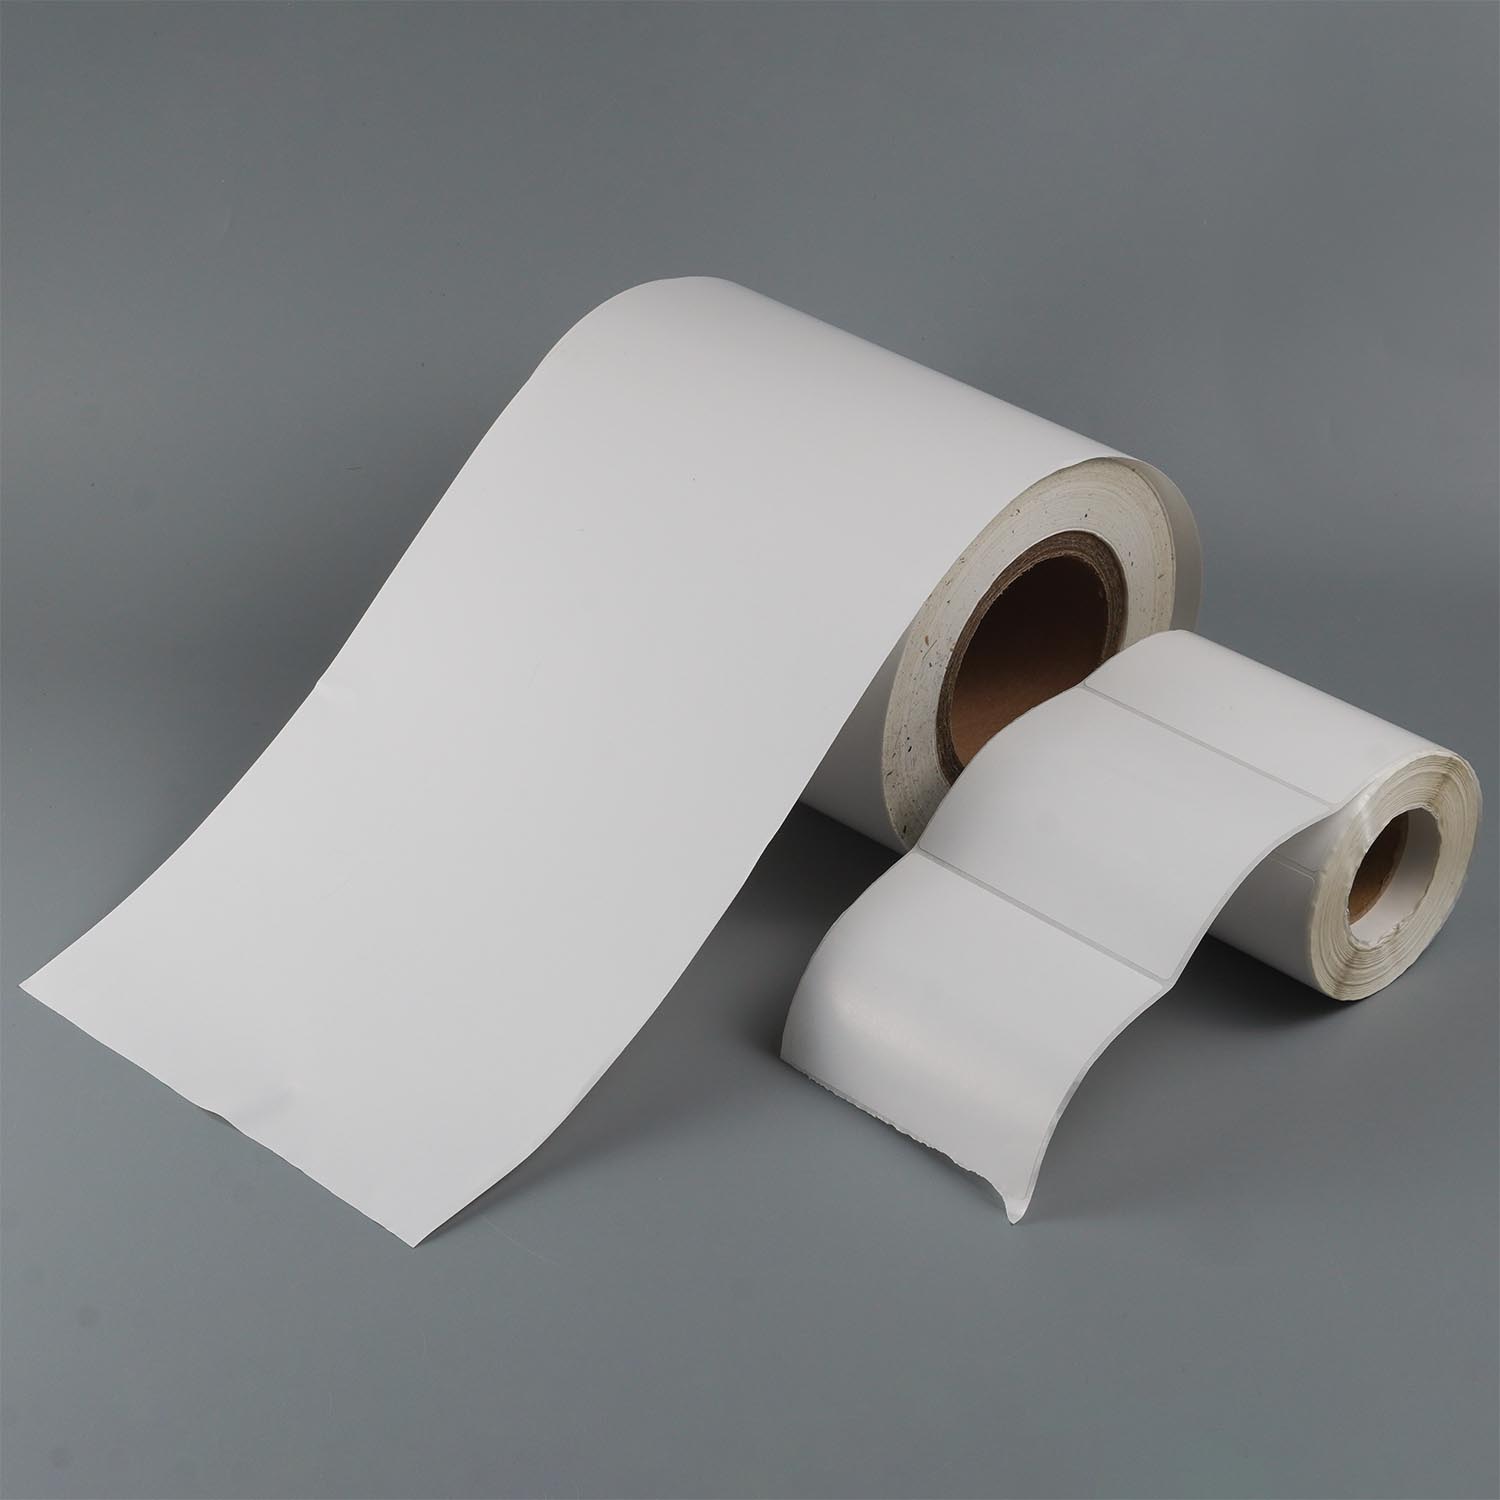 THERMAL PAPER STICKER IN SMALL ROLL